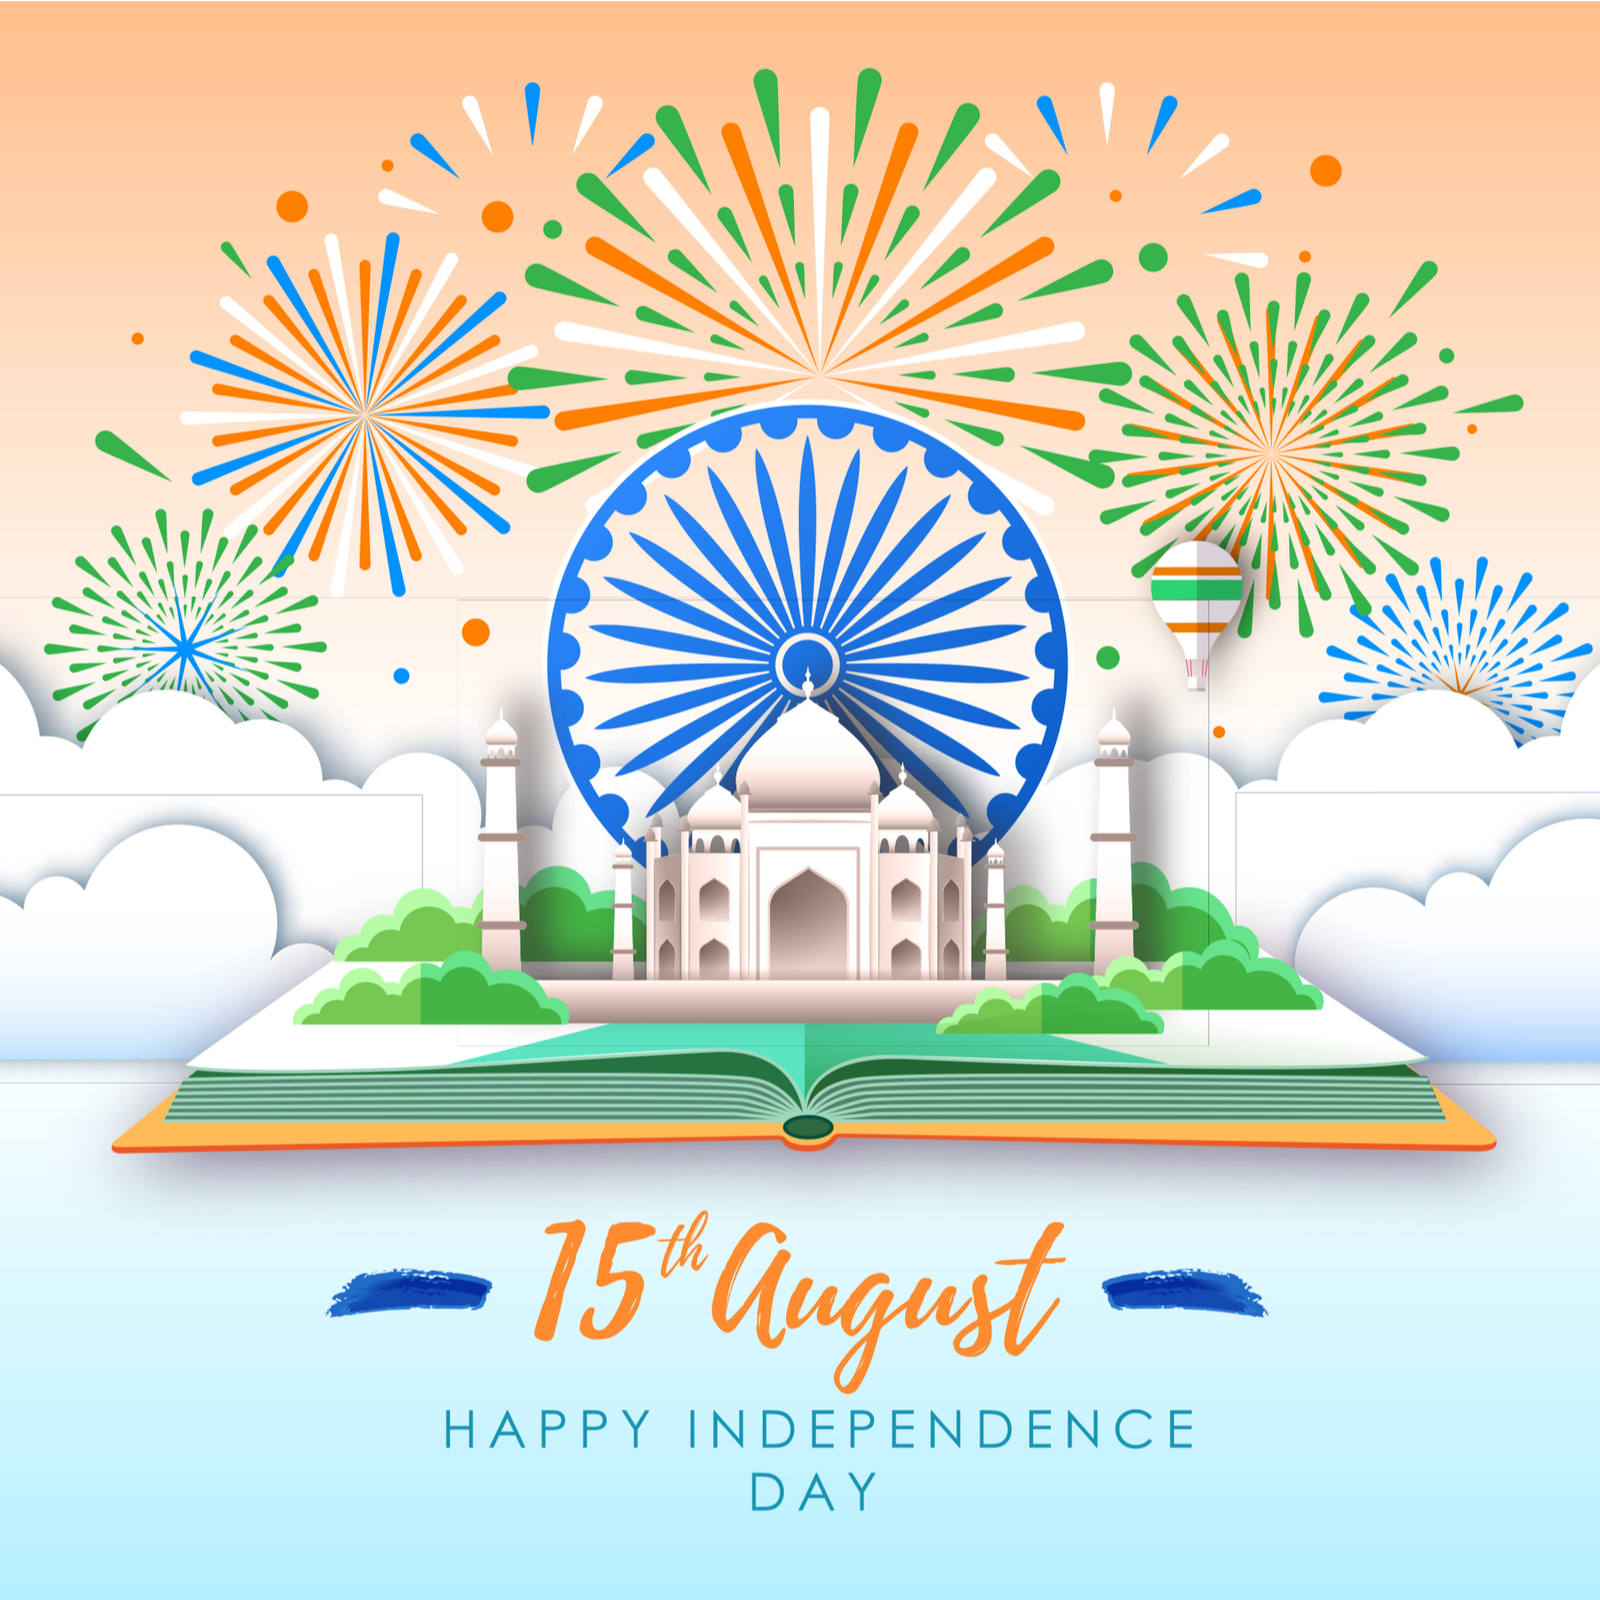 Happy Independence Day 2023 Wishes: Spread the Spirit of